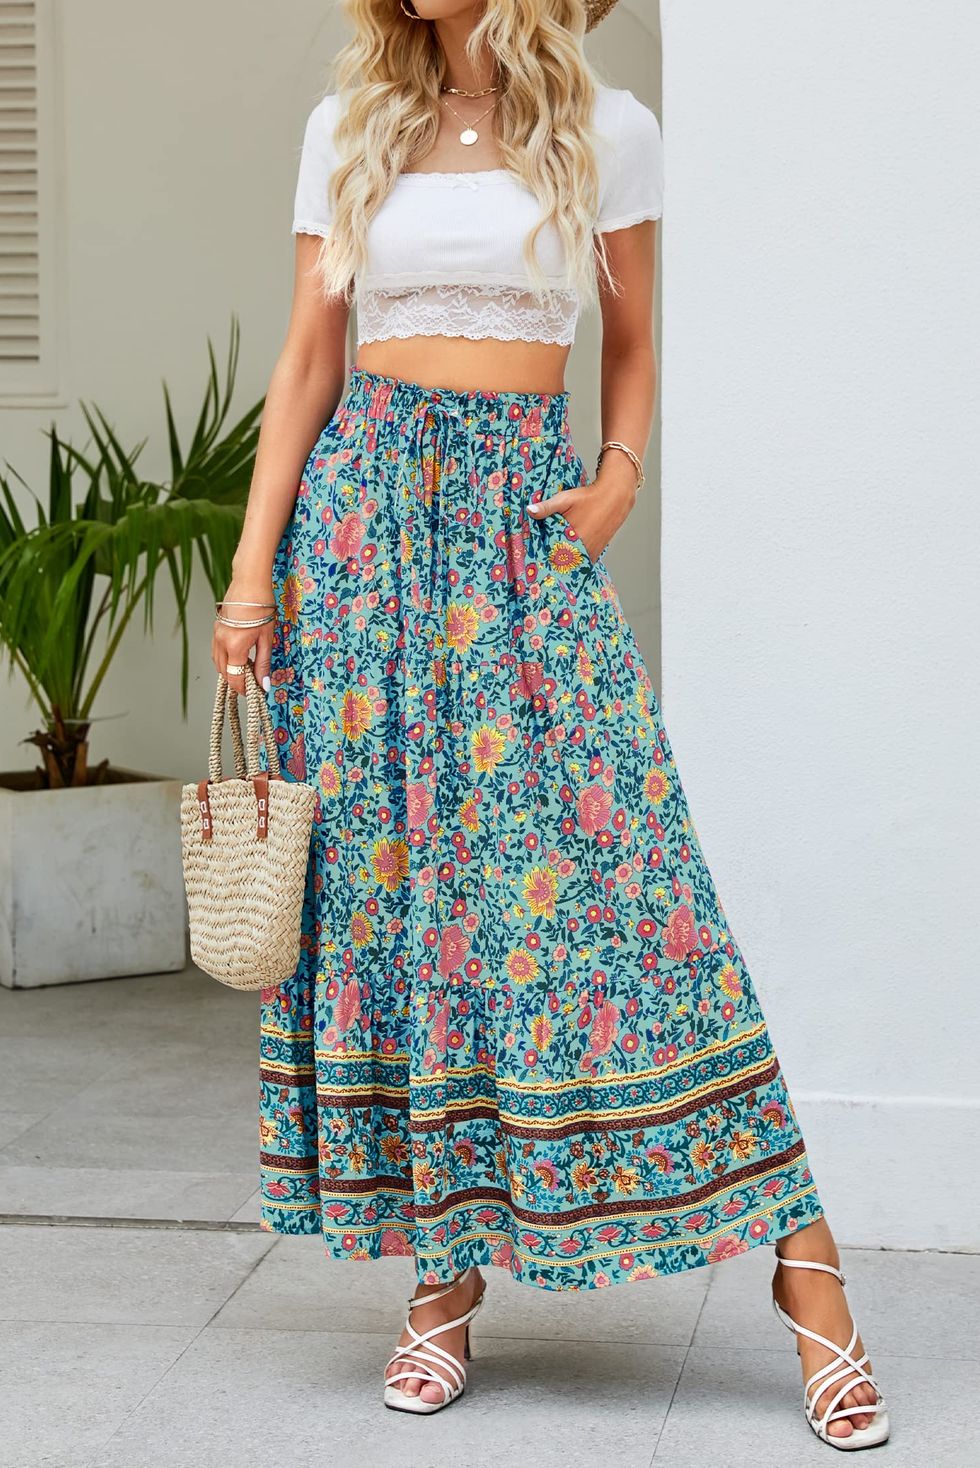 10 Skirt Trends to Try for Summer